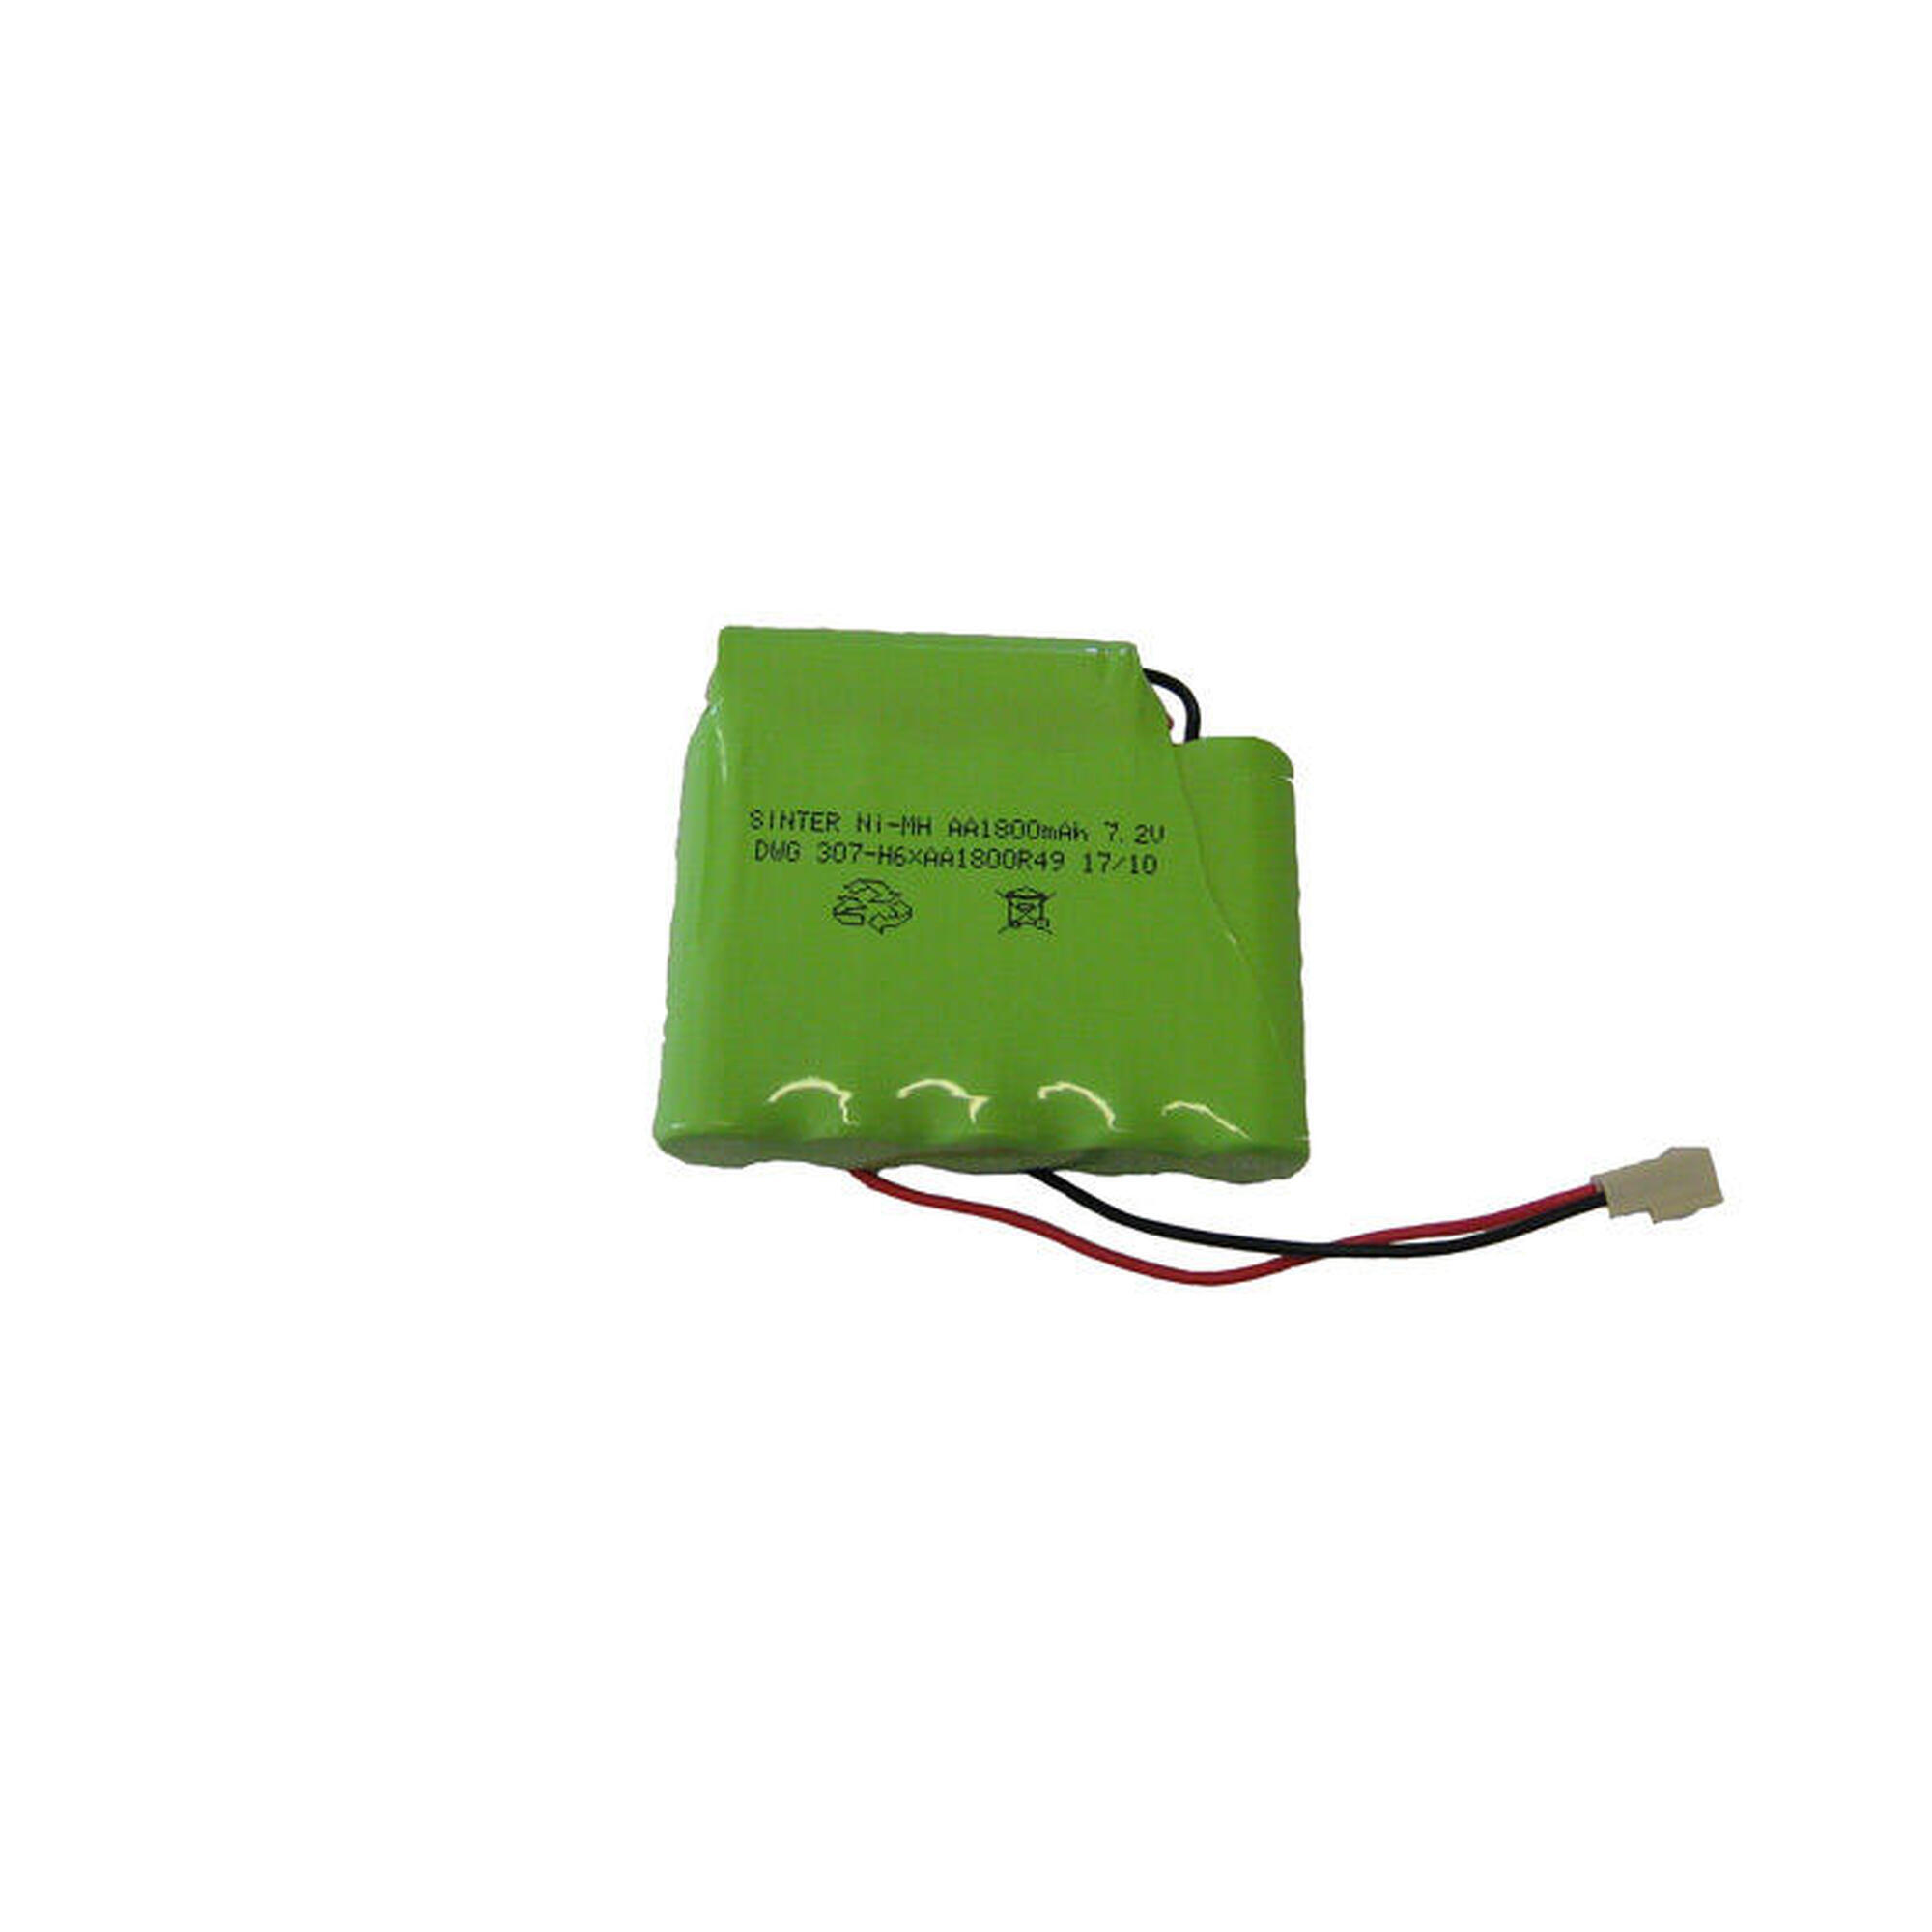 Globus Battery Pack 1800 mA for 4 channels